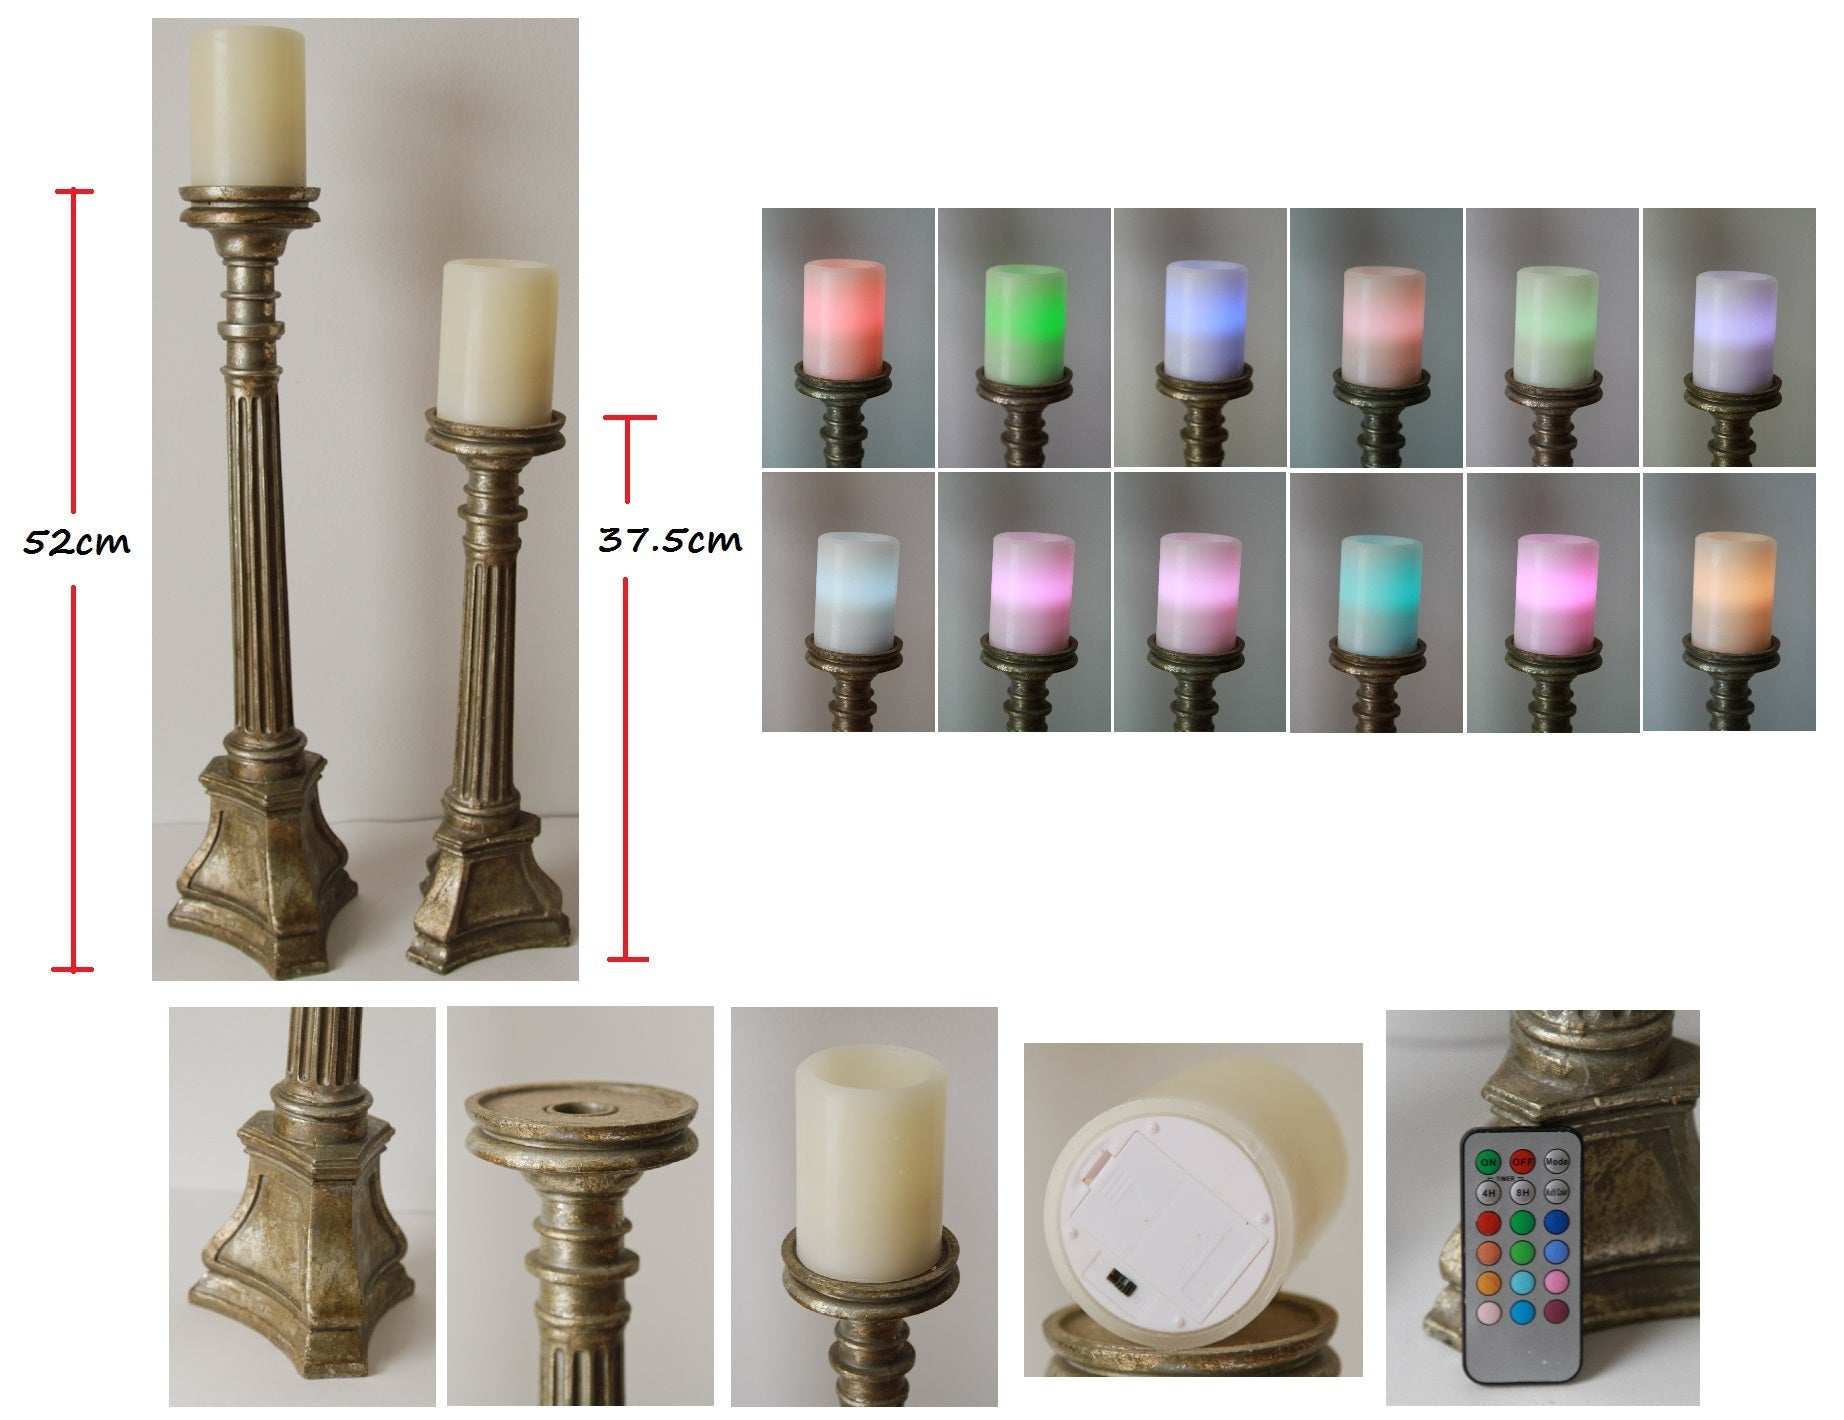 8 x Electric Candles / Vintage Look Candle Holders Ornate Candlestick Decorative